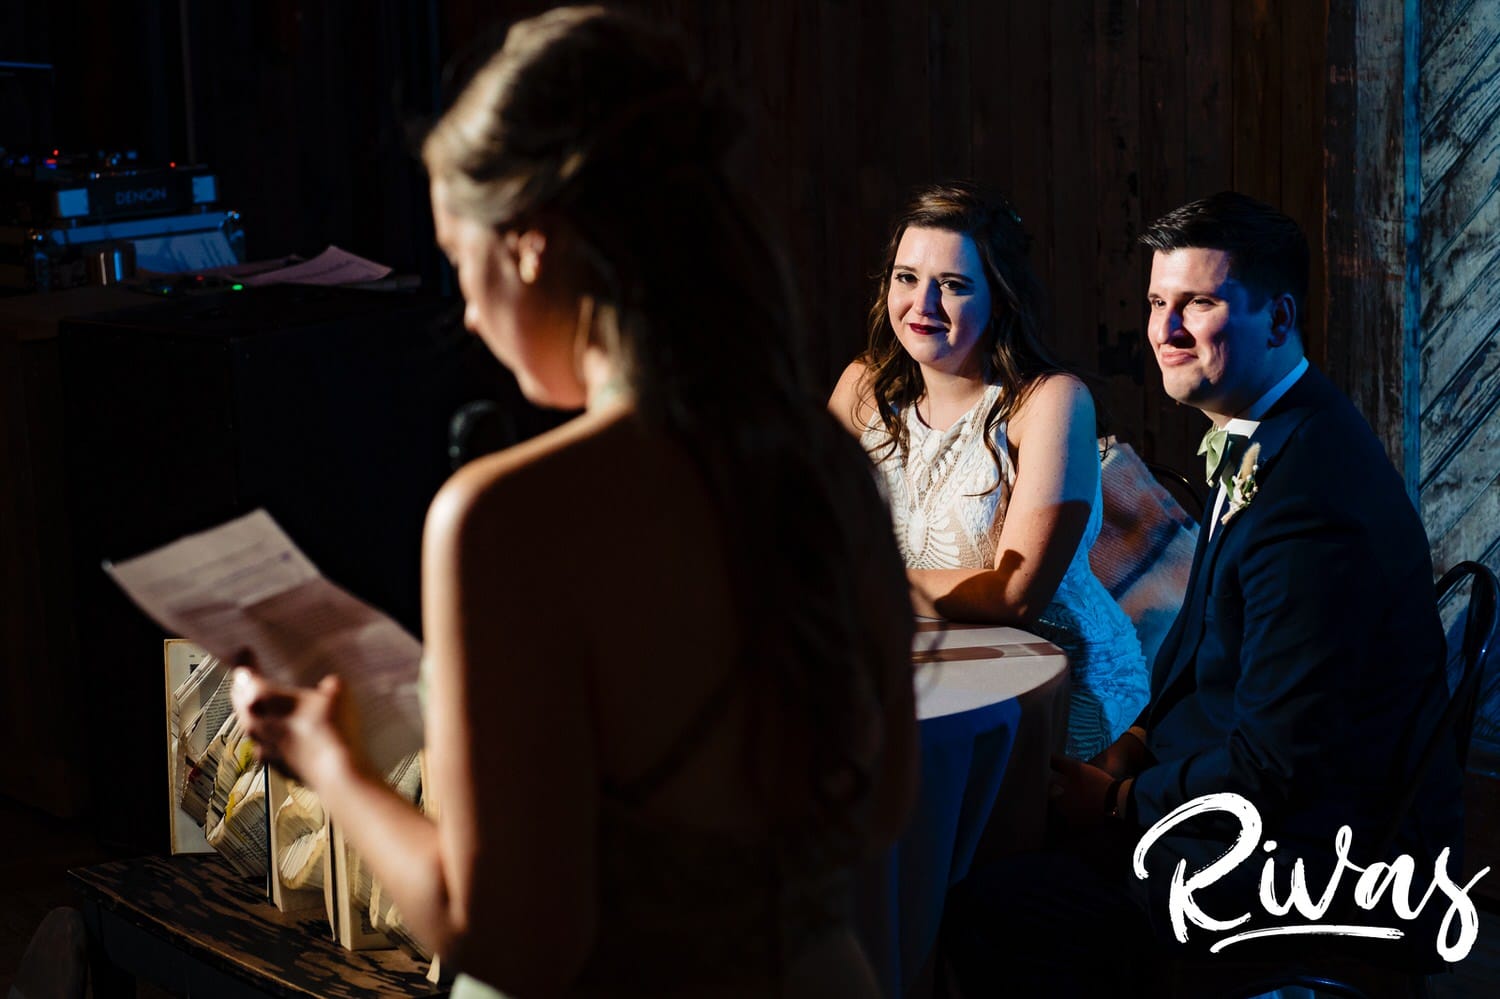 A candid picture taken over the shoulder of a bridesmaid as she toasts the bride and groom during a fall wedding reception at The Foundation event Space. 